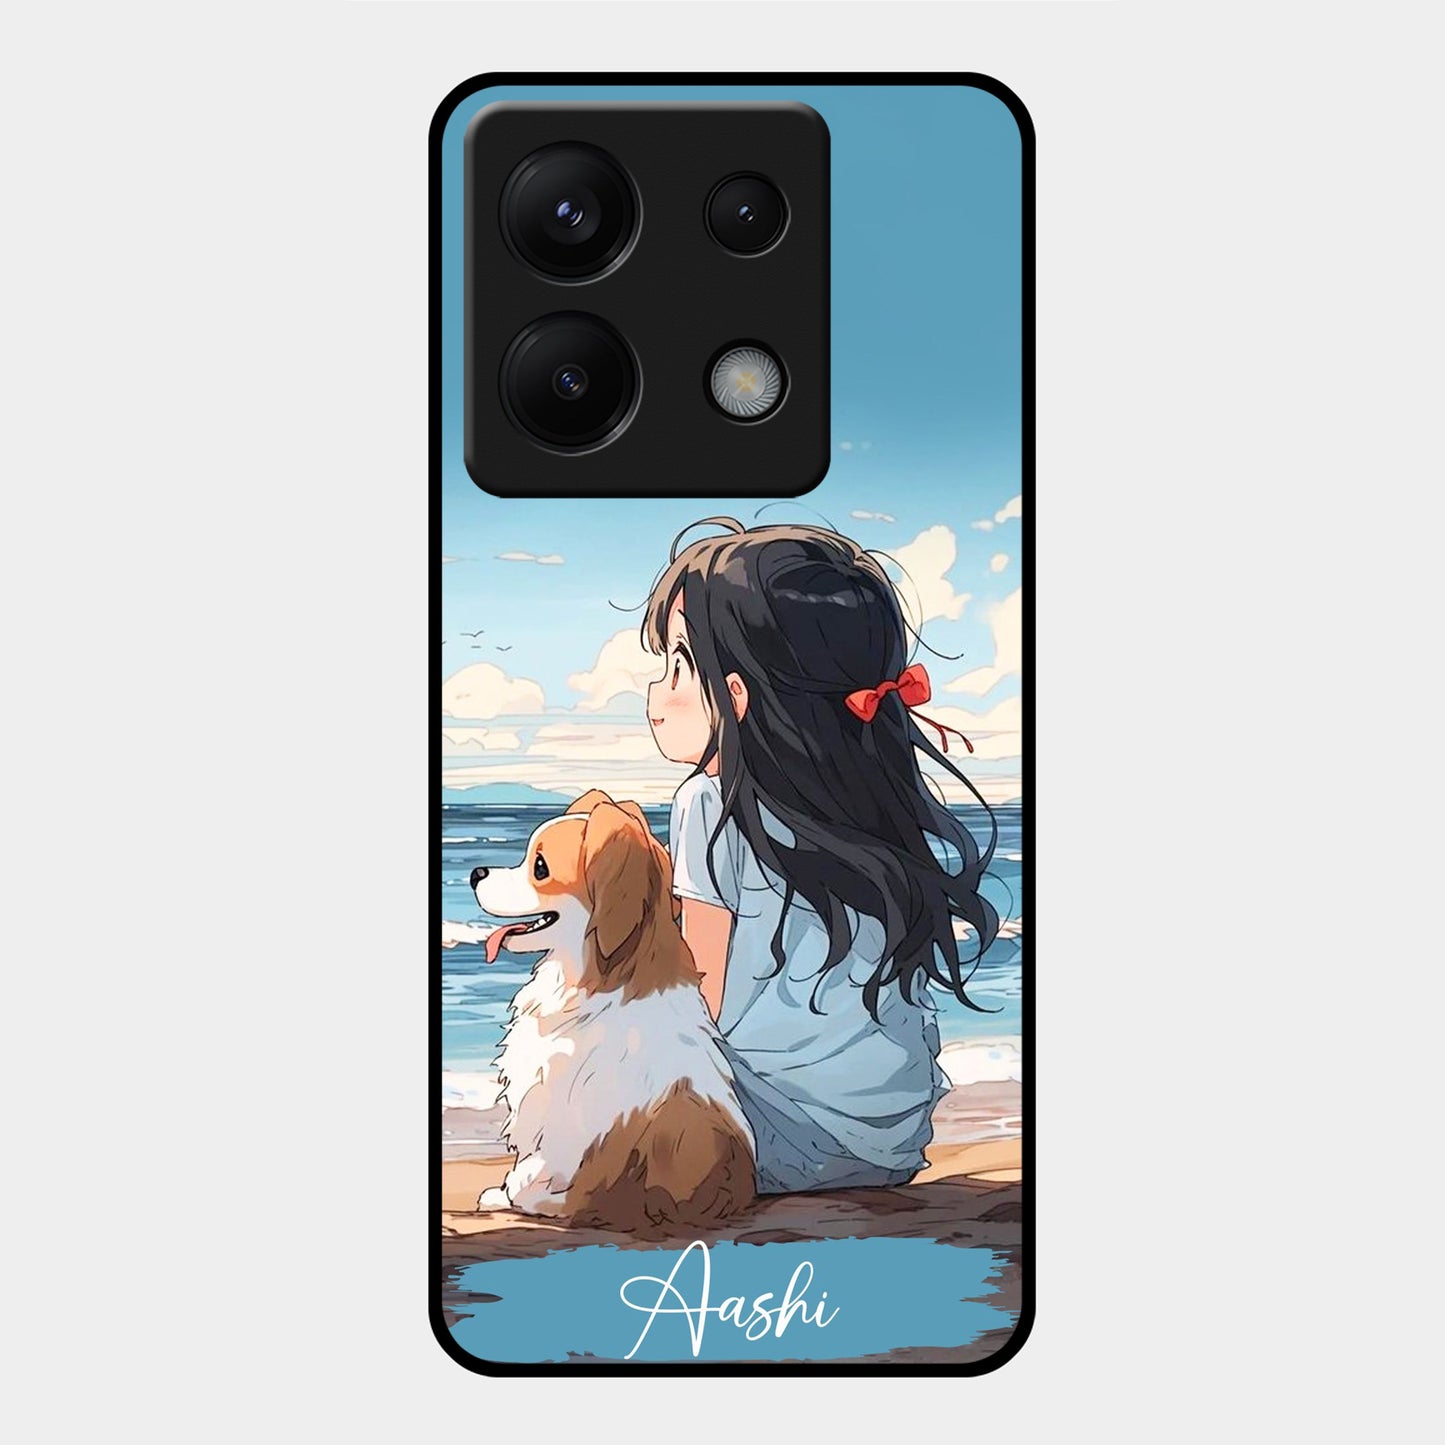 Girl With Dog Glossy Metal Case Cover For Redmi